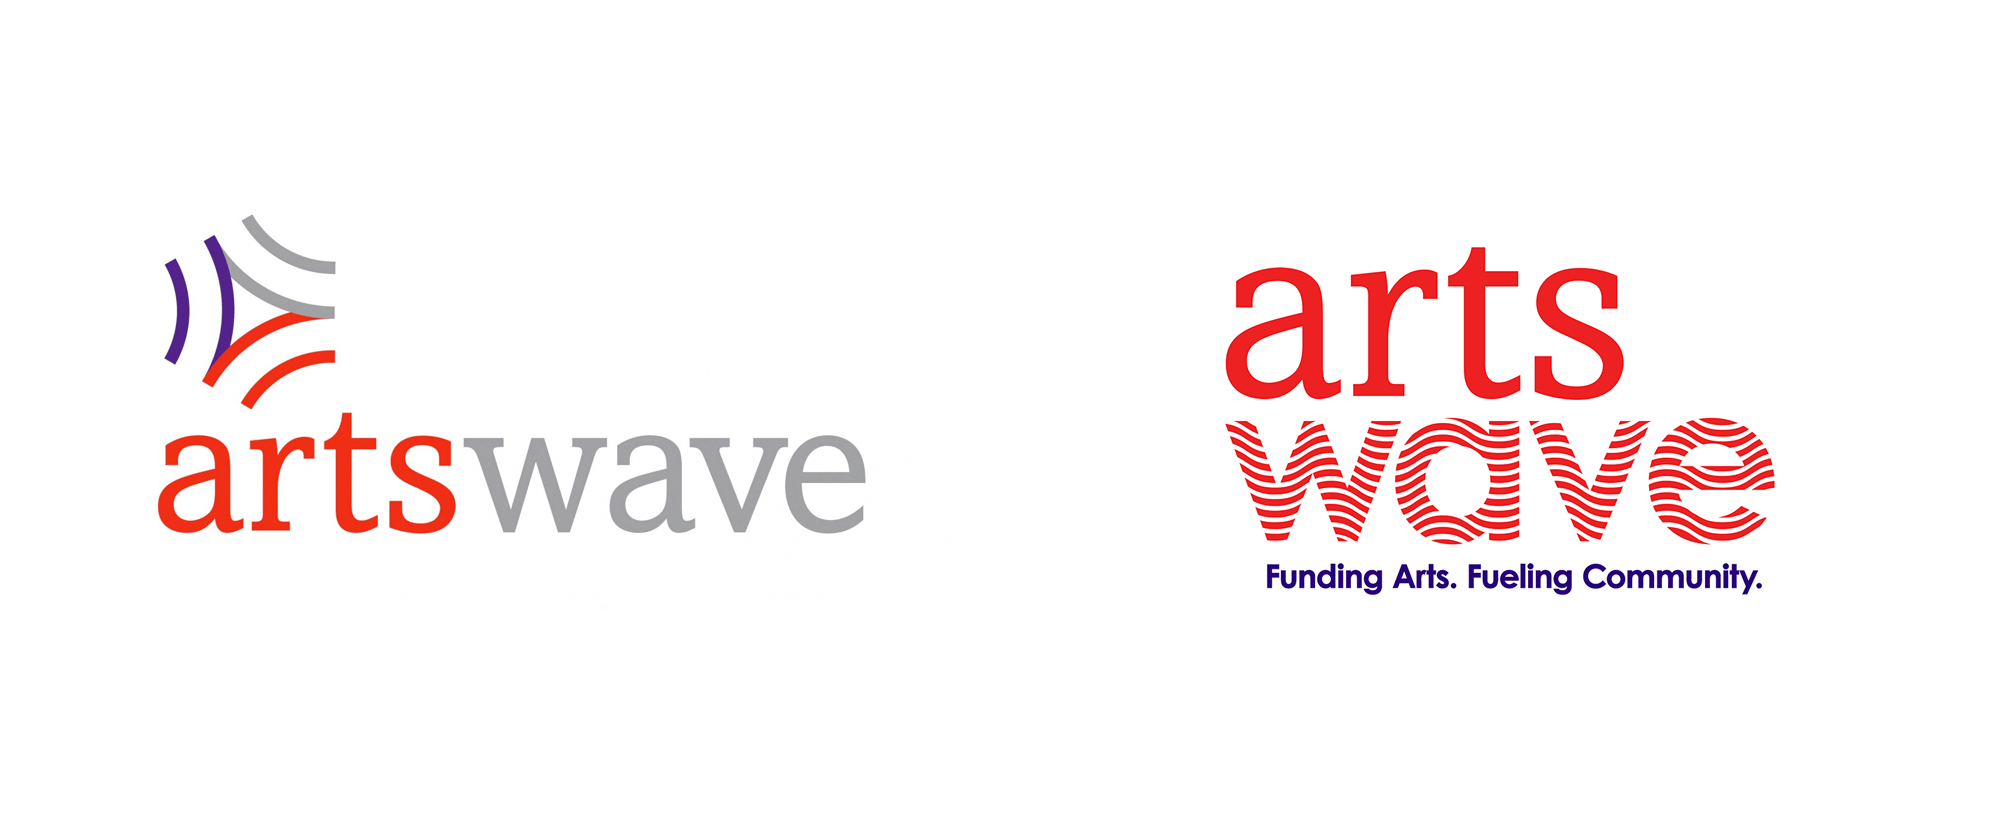 New Logo and Identity for ArtsWave by LPK